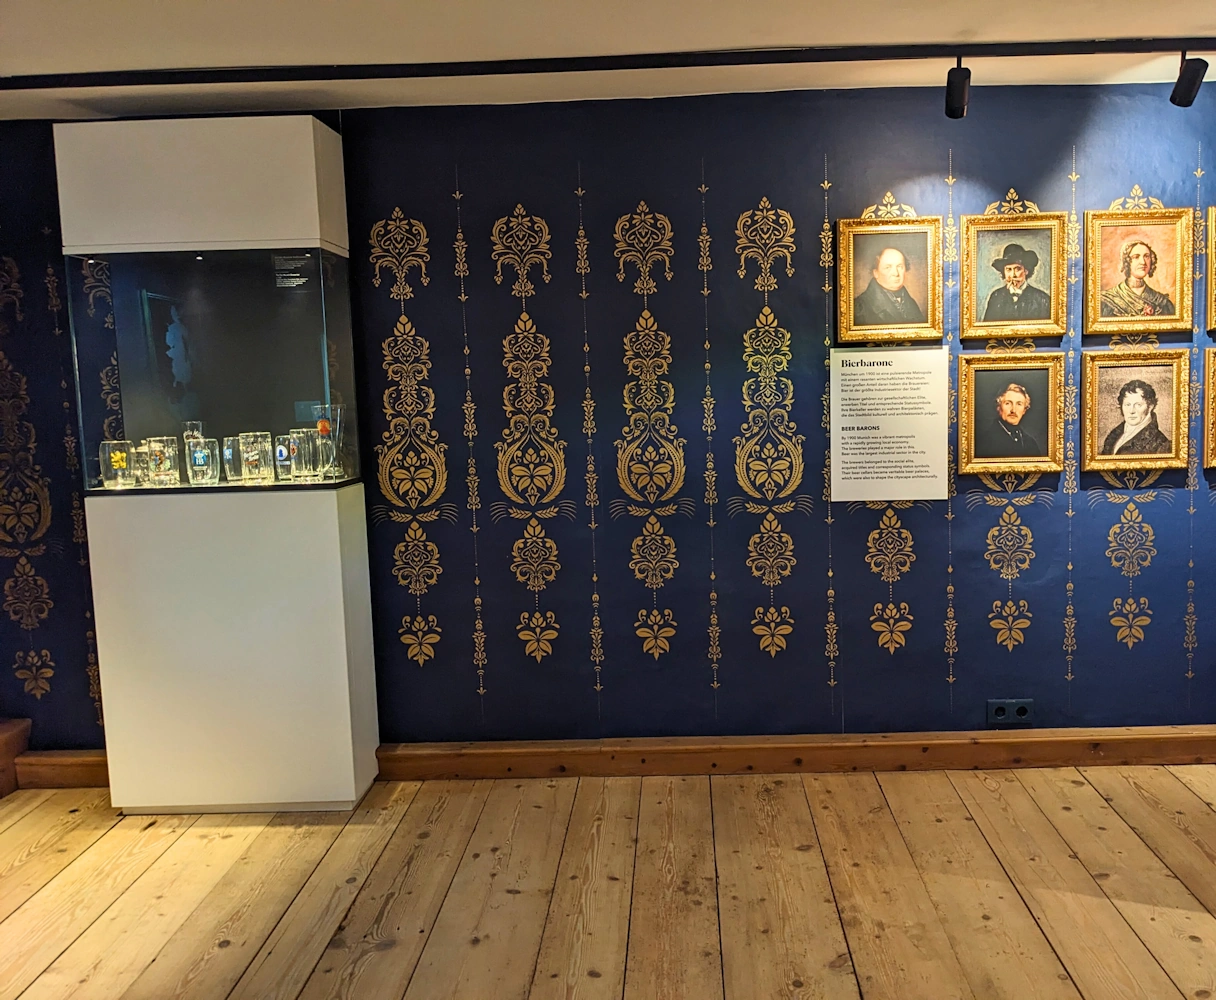 Beer & Oktoberfest Museum exhibition, various beer mugs on the left and paintings of former beer barons on the right, including a woman